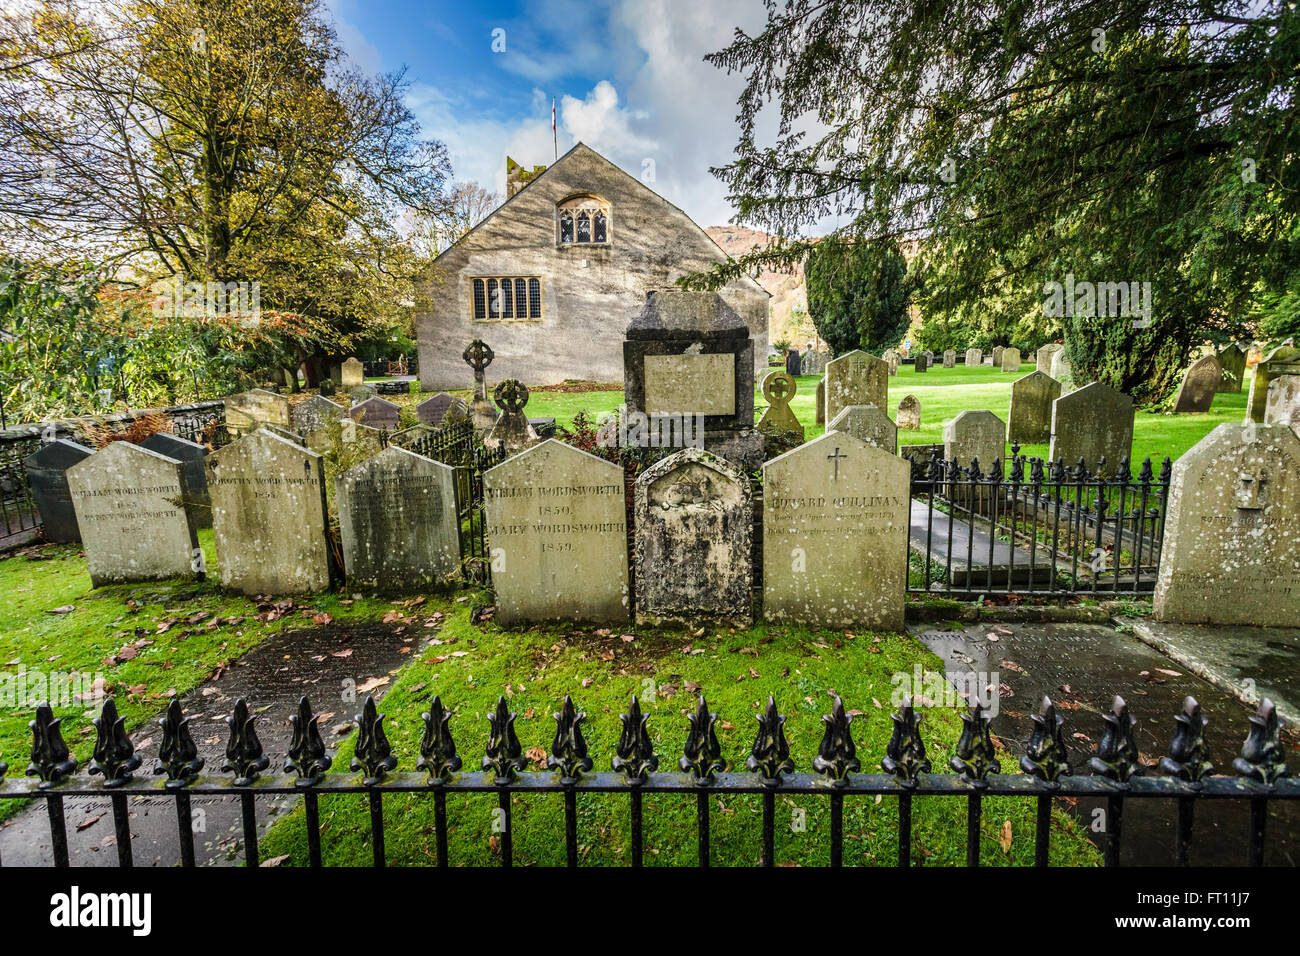 The graves of William Wordsworth and family at St Oswald’s Church, Grasmere in the Lake District. Stock Photo